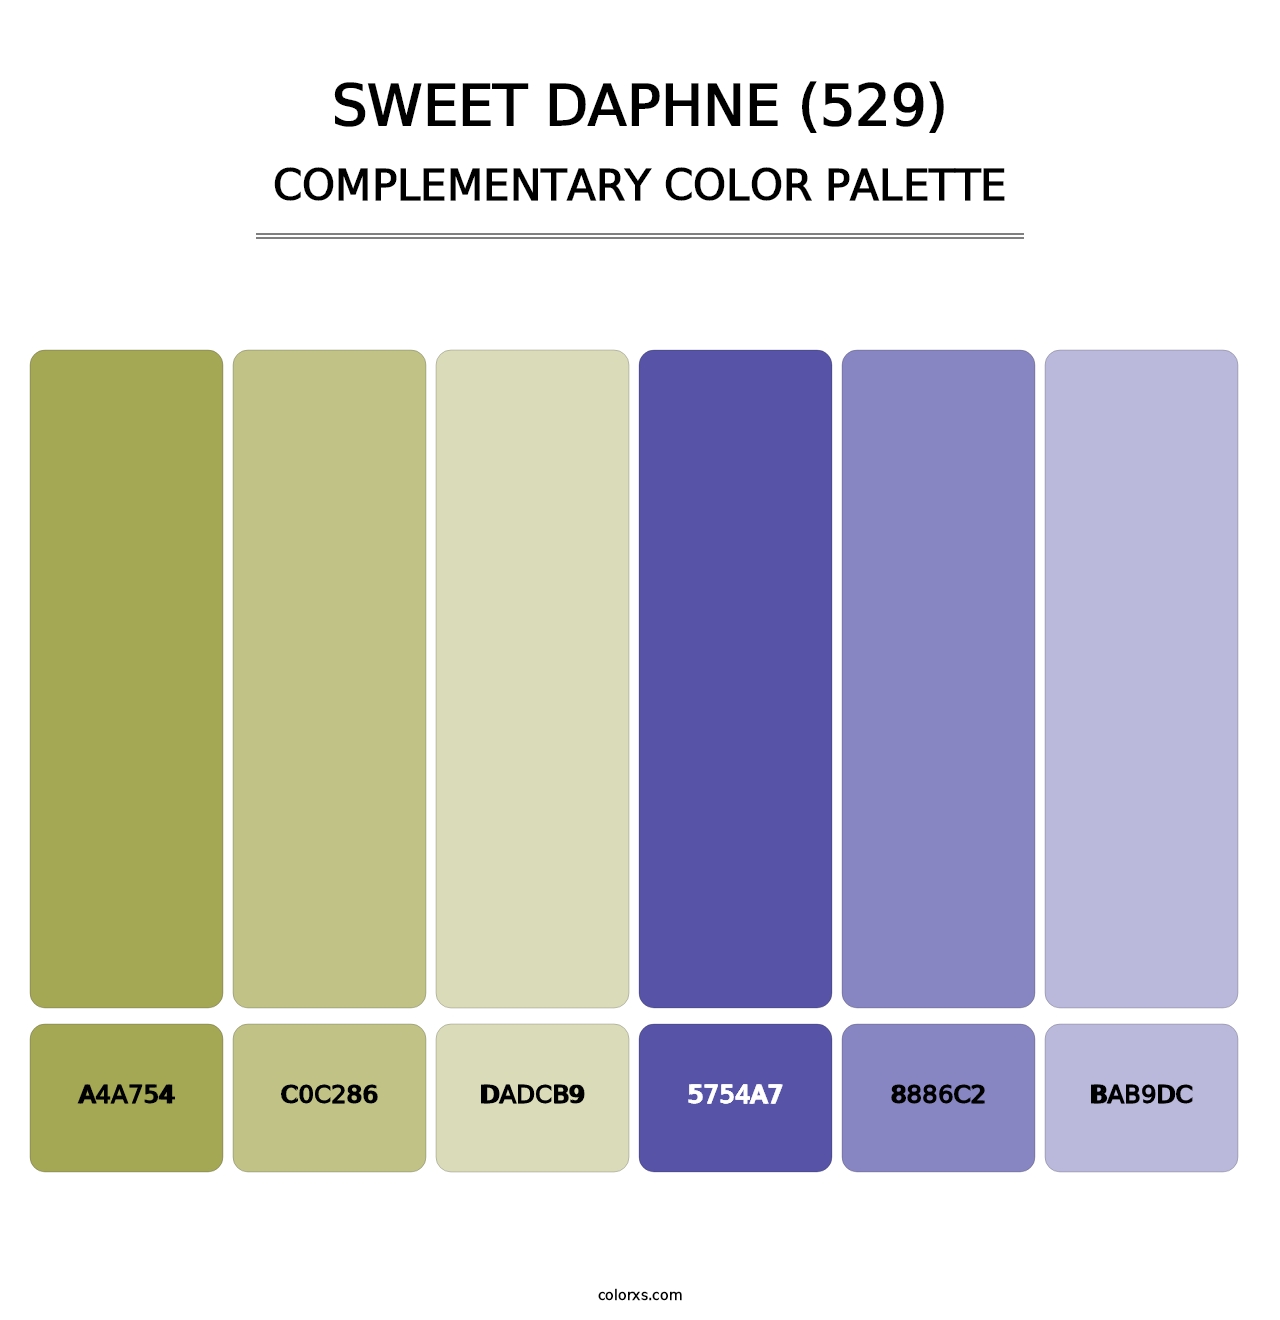 Sweet Daphne (529) - Complementary Color Palette